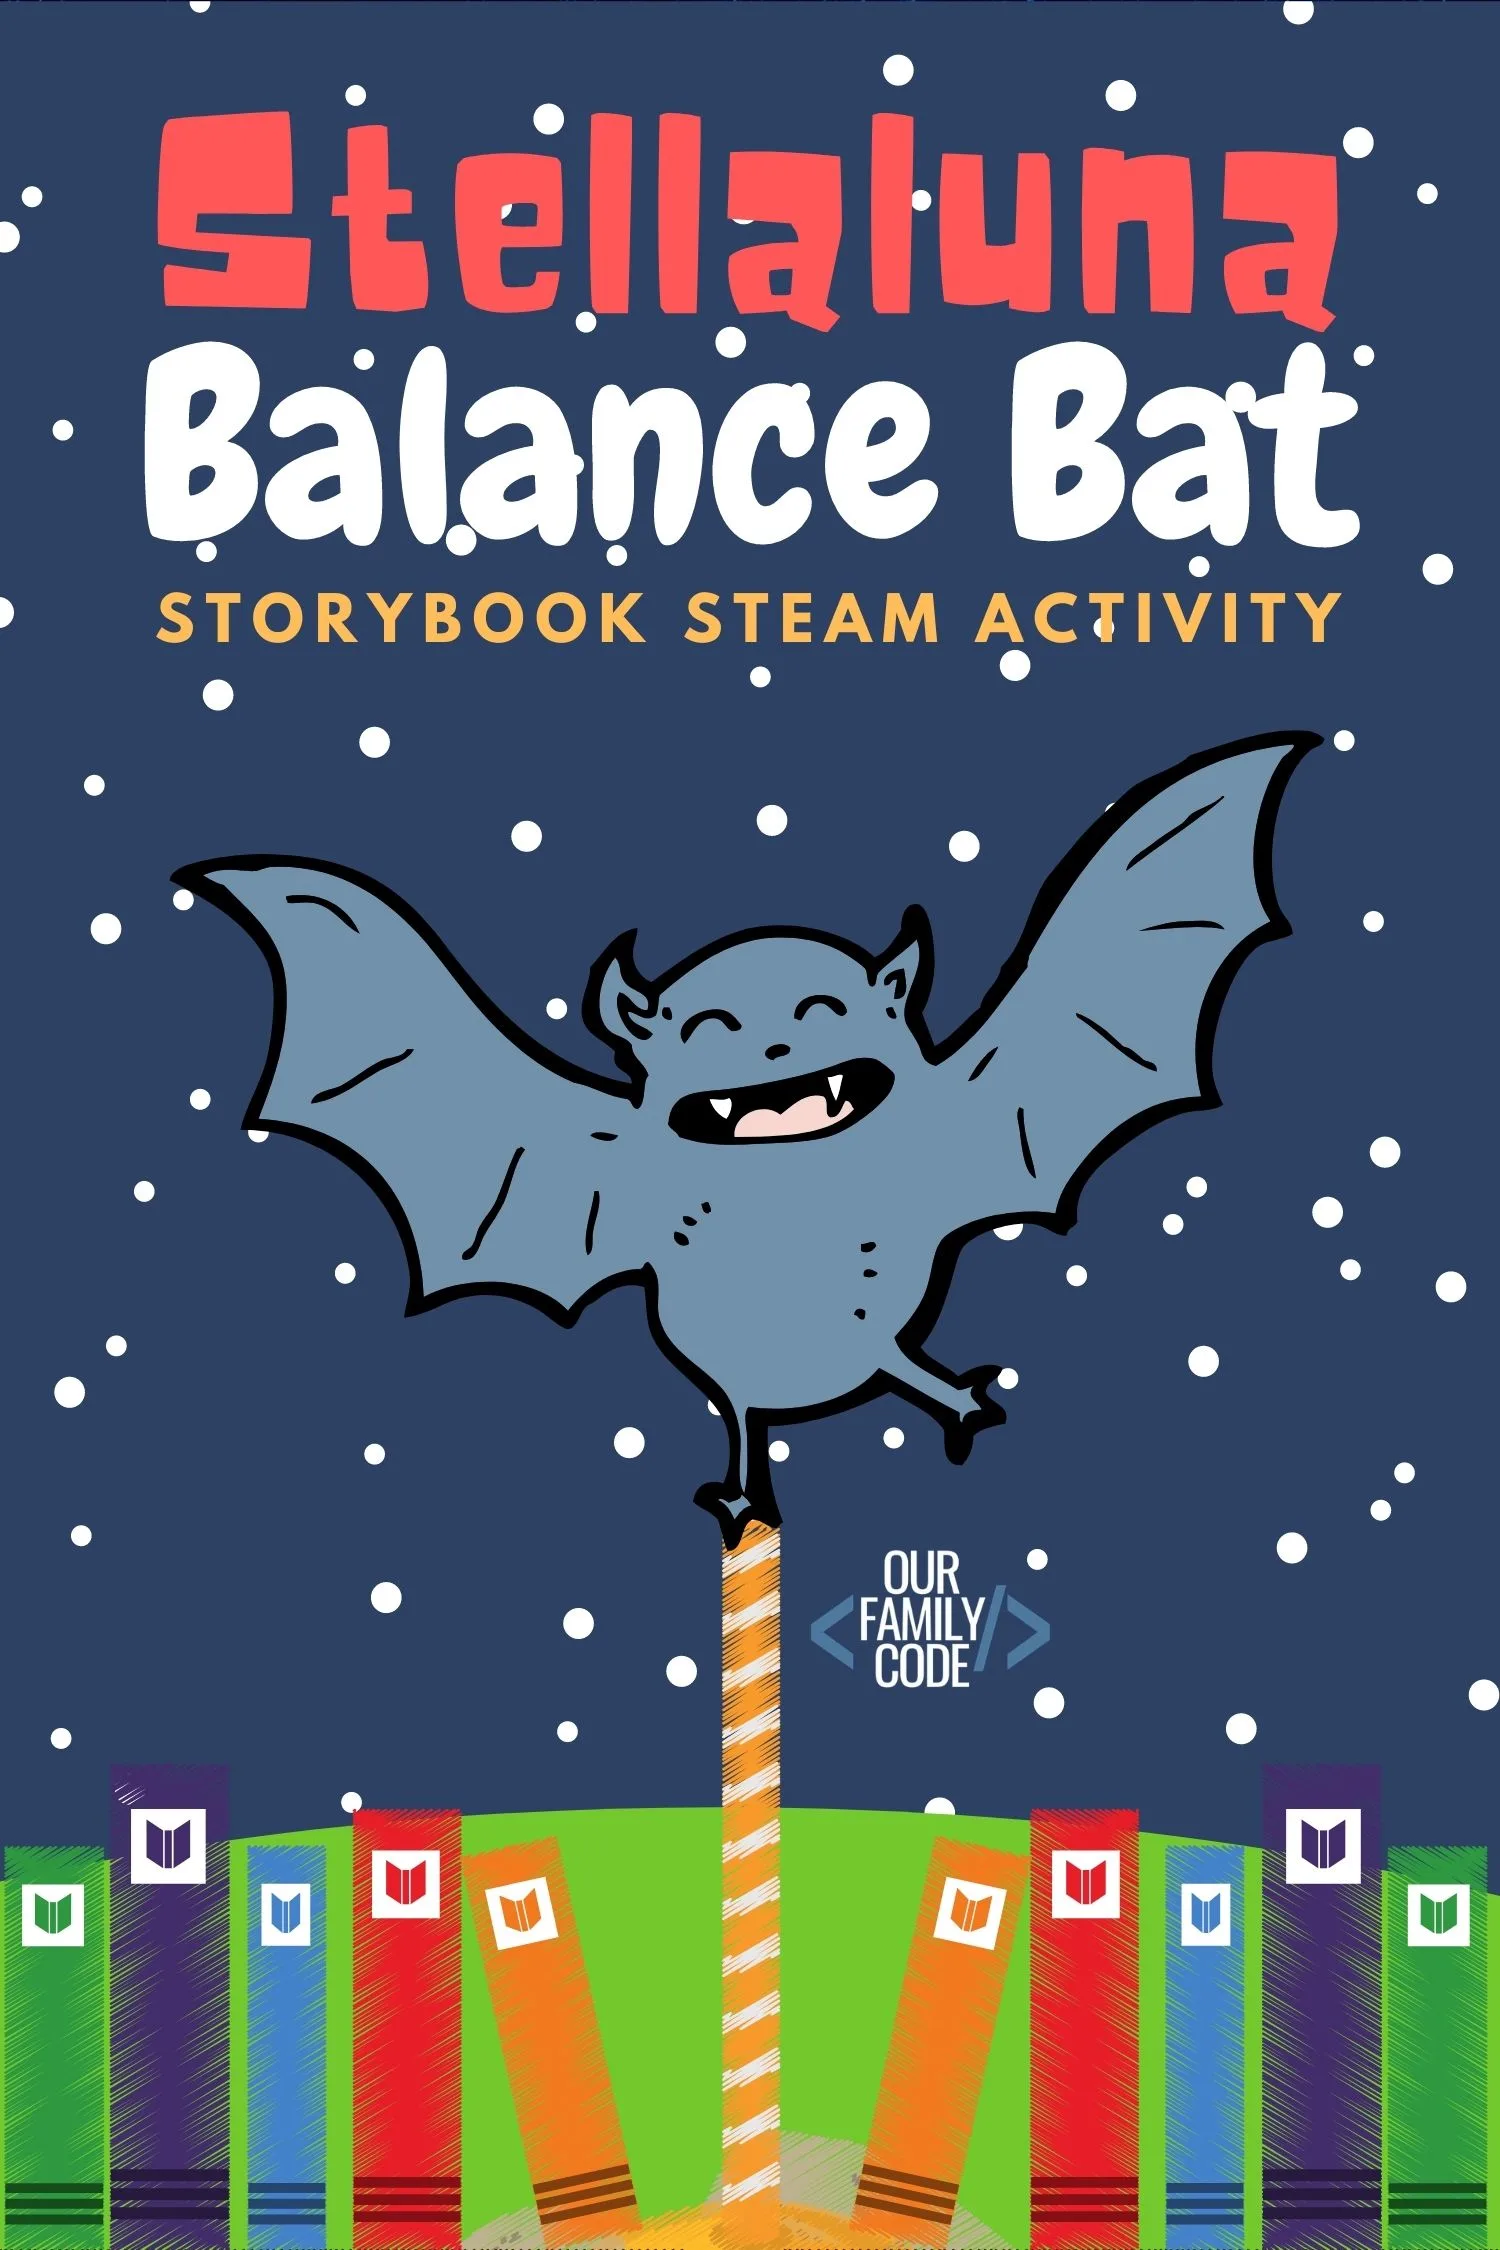 Learn about the center of gravity with this Stellaluna book activity and see if you can make Stellaluna into a balance bat!